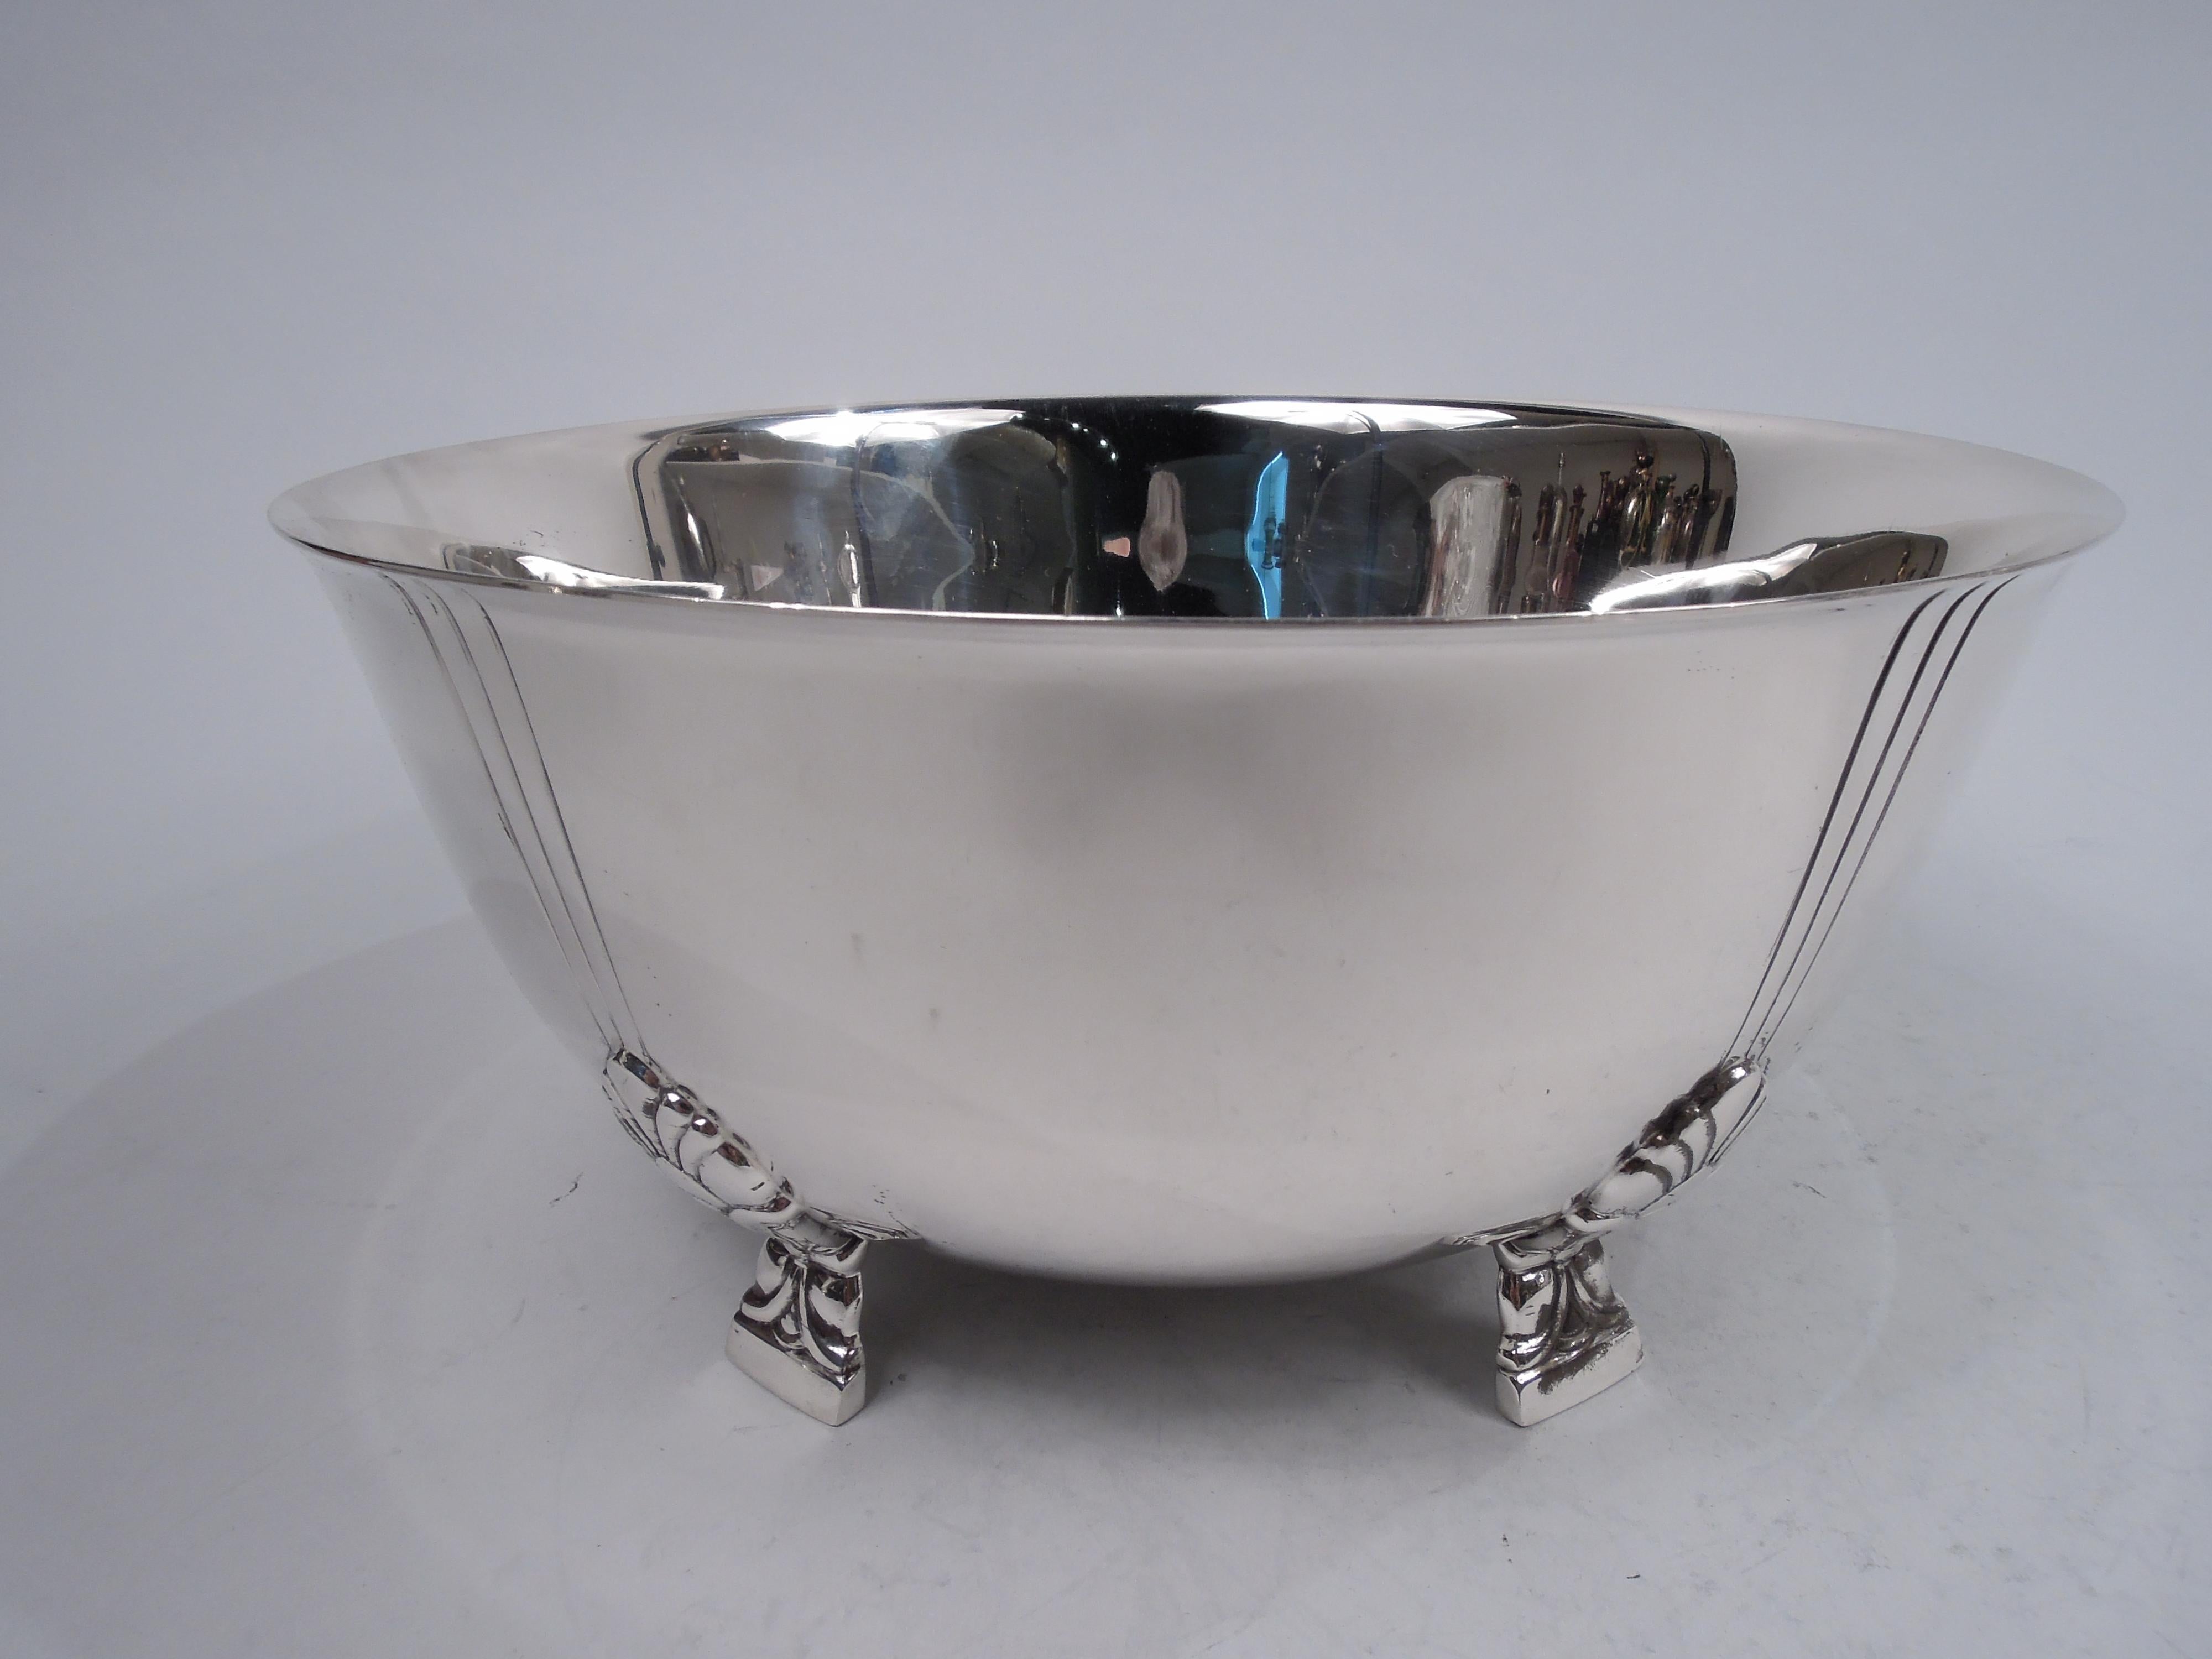 Palmette sterling silver bowl. Made by Tiffany & Co. in New York. Curved sides and flared rim. Rests on 5 side-mounted stylized floral supports. Each support radiates 3 incised vertical lines. An early piece in this pattern (no. 23239), which was